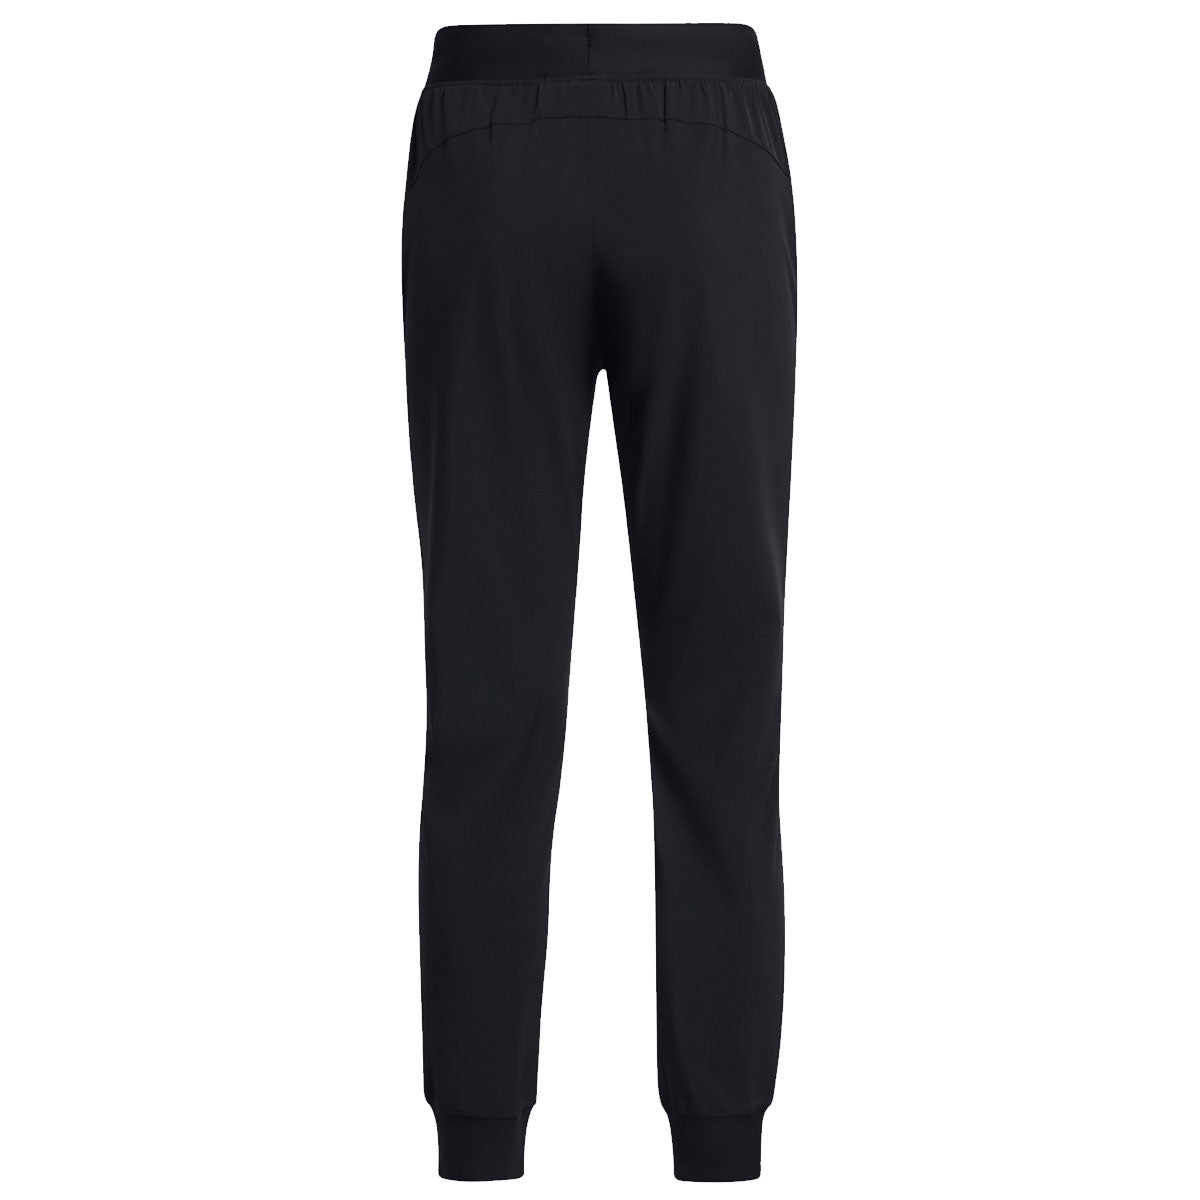 Under Armour Rival High Rise Woven Pants - Womens - Black/White